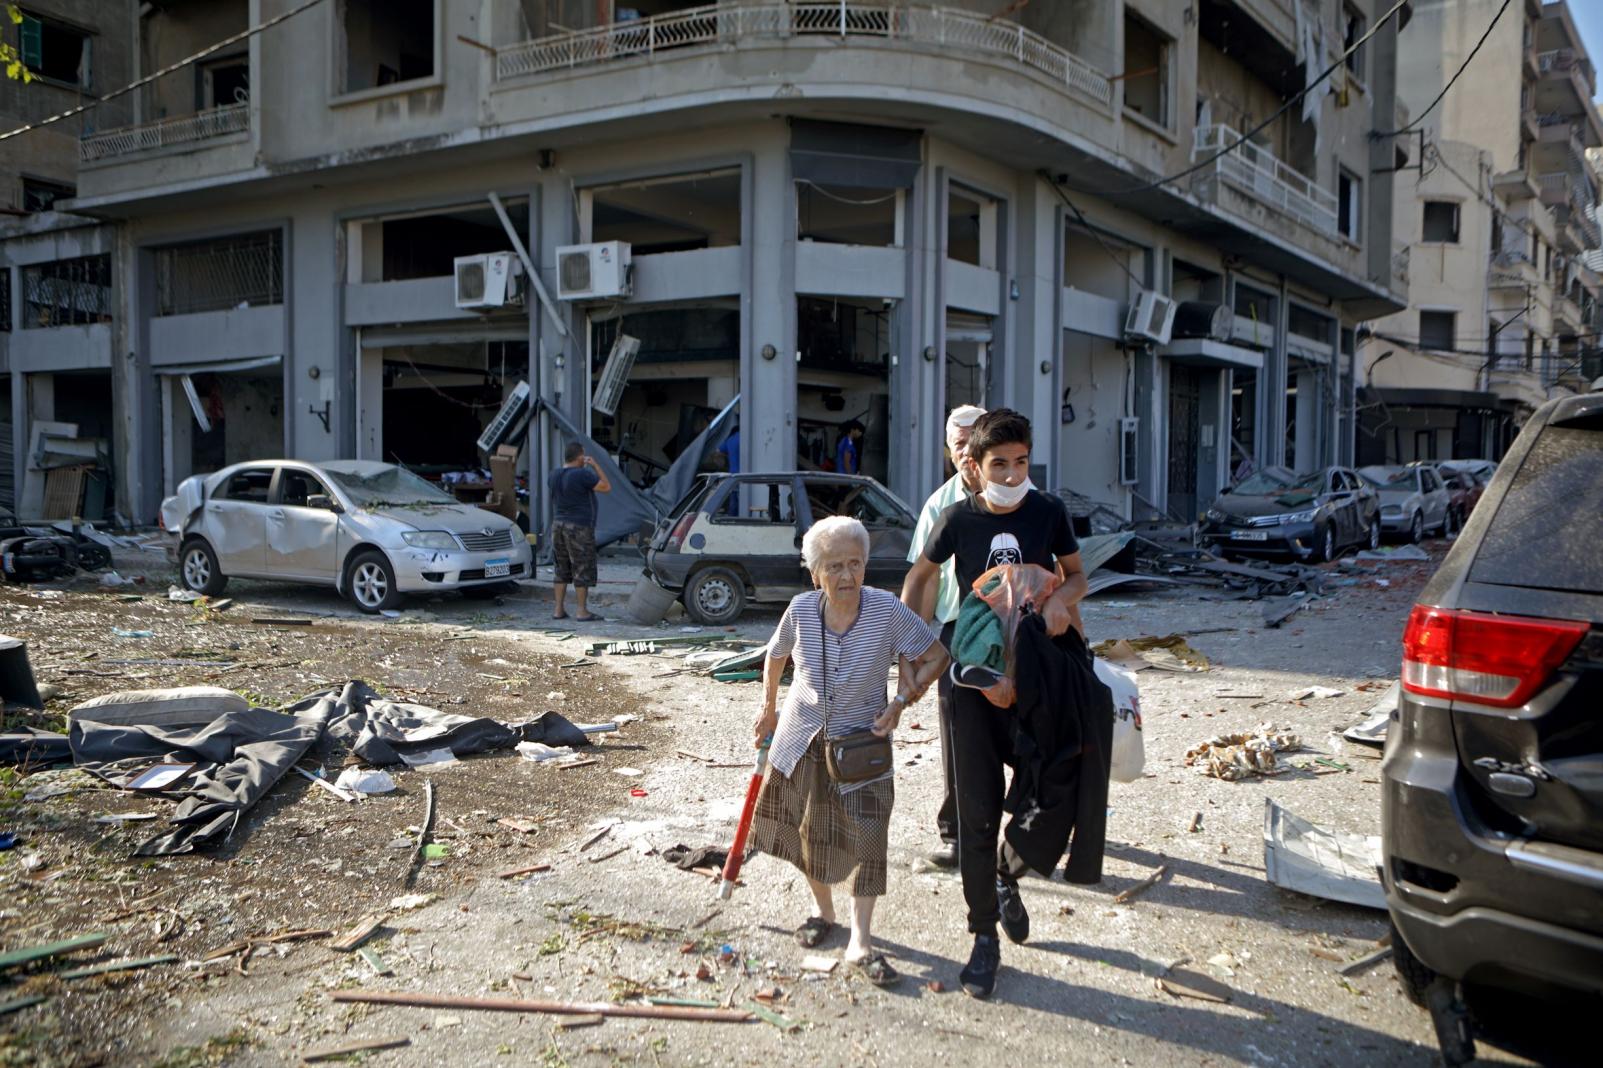 80,000 children displaced due to Beirut explosions – UNICEF